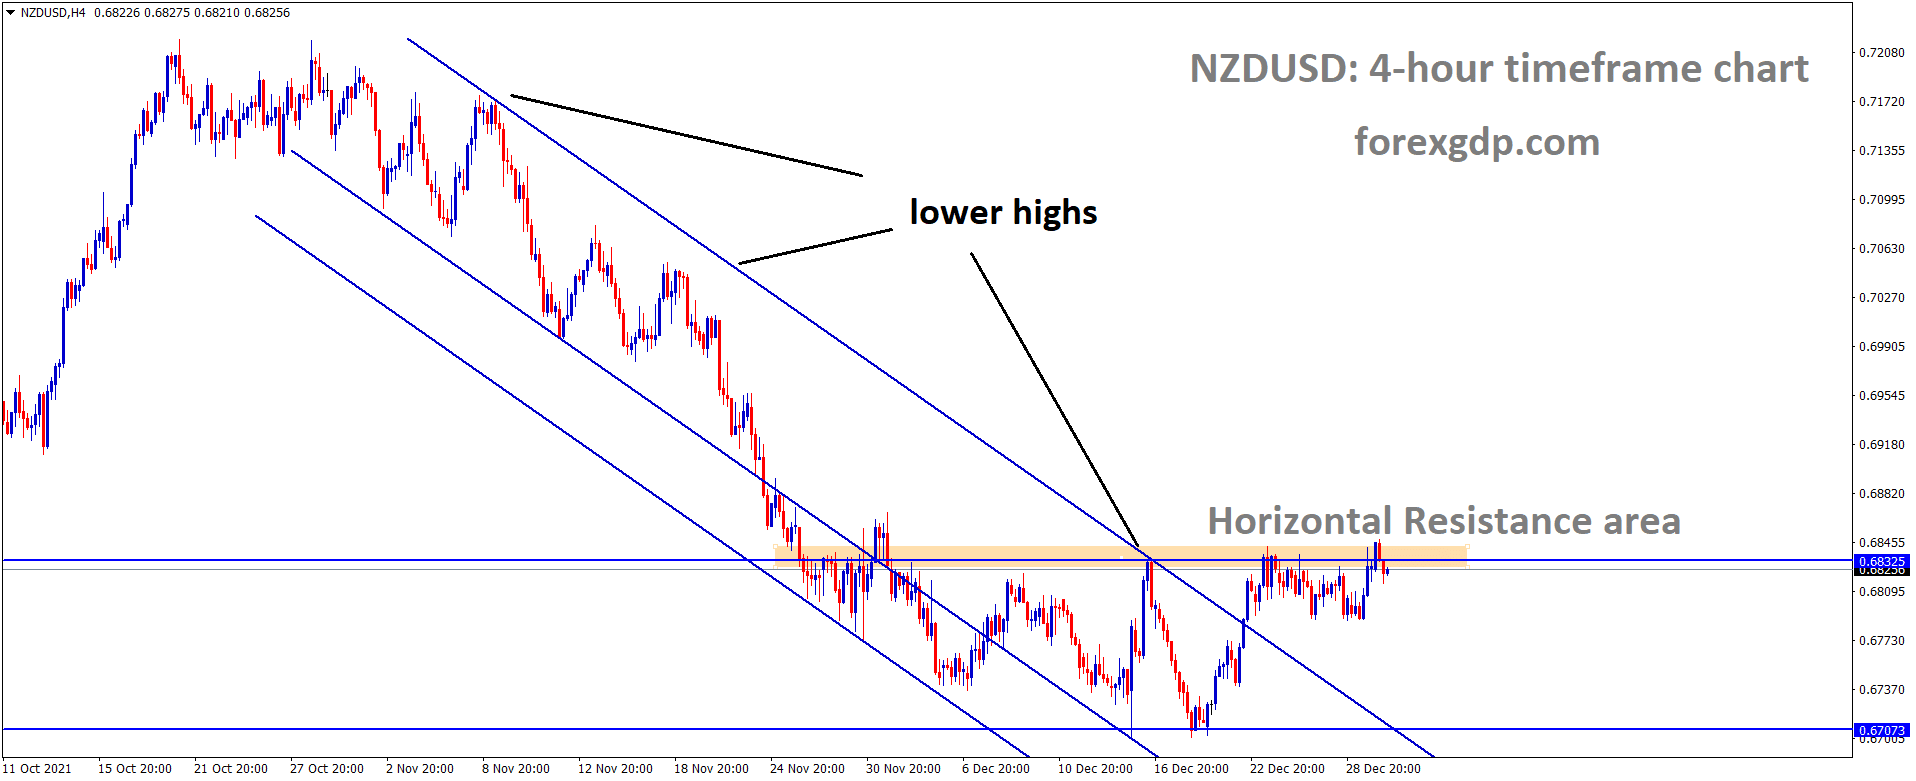 NZDUSD is moving in the Box Pattern and the market has reached the horizontal resistance area of the Box Pattern